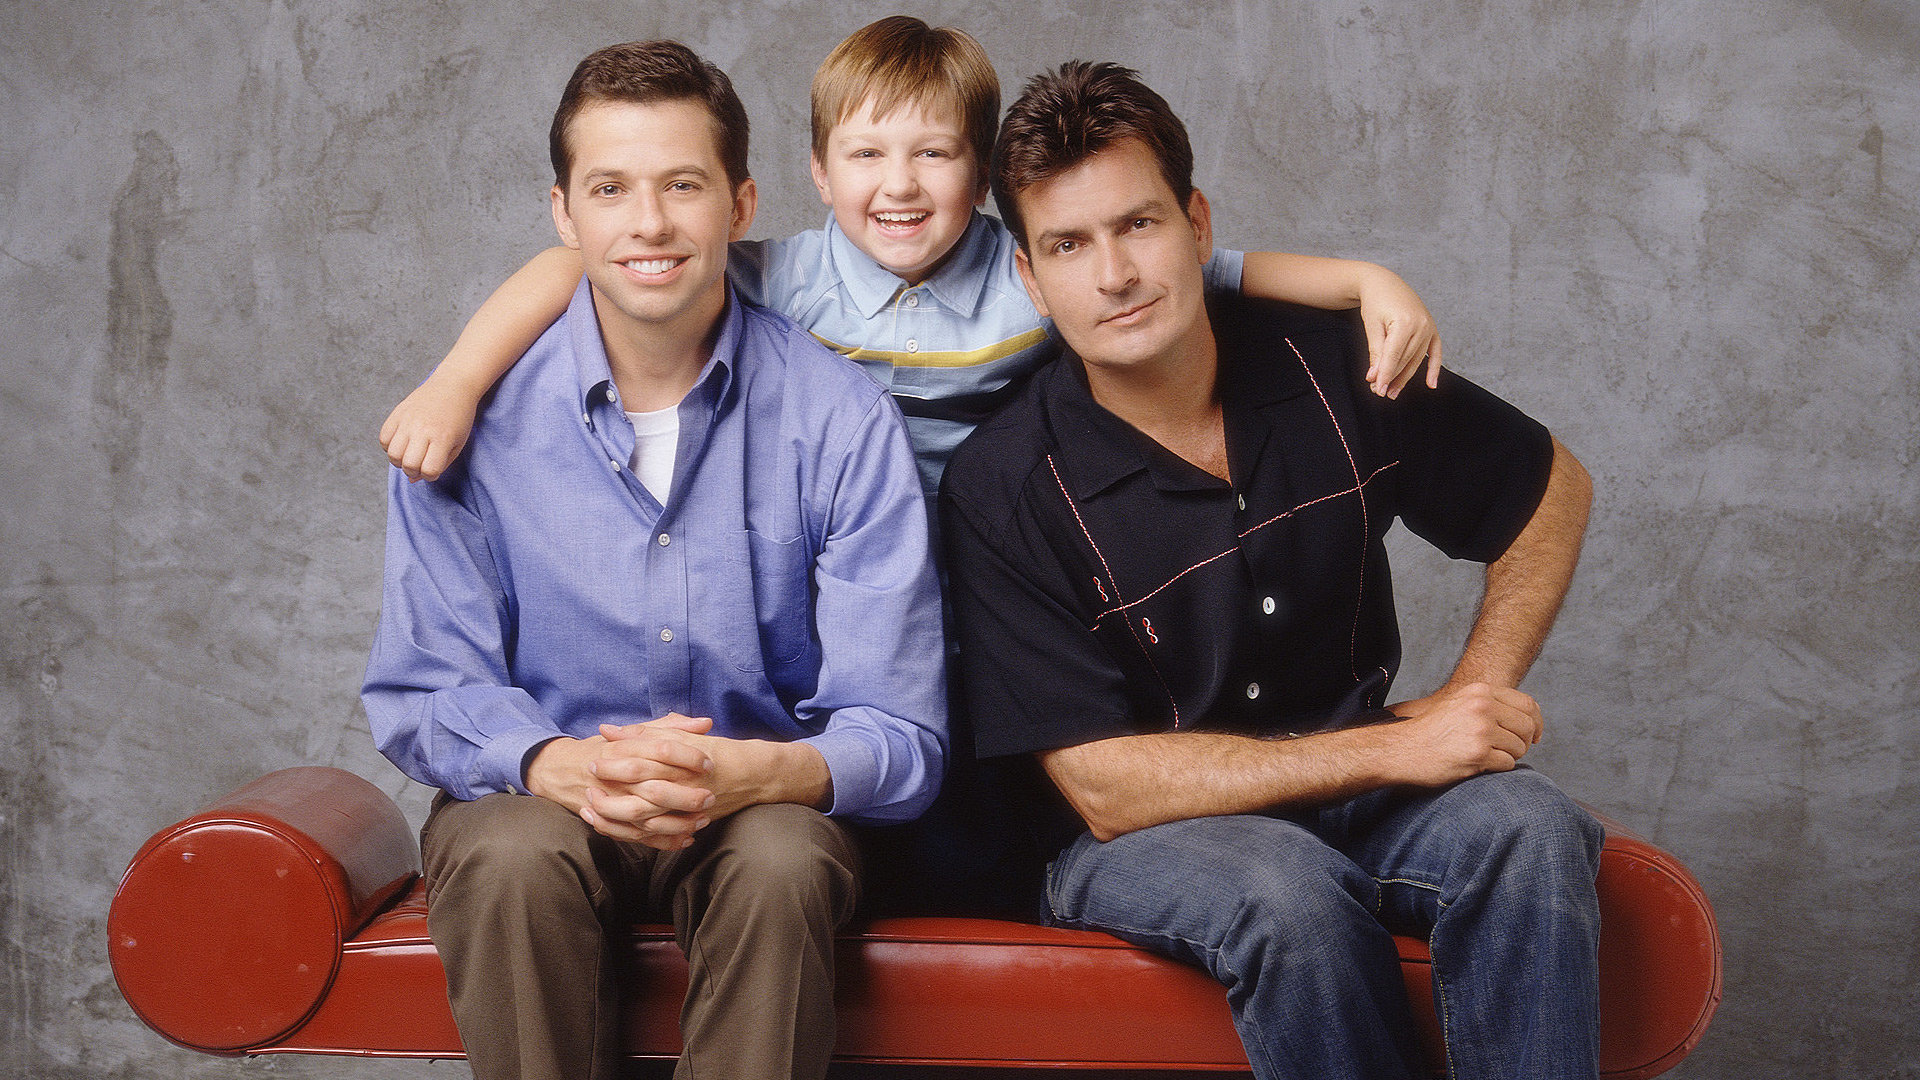 Best Two And A Half Men wallpaper ID:460307 for High Resolution hd 1080p computer